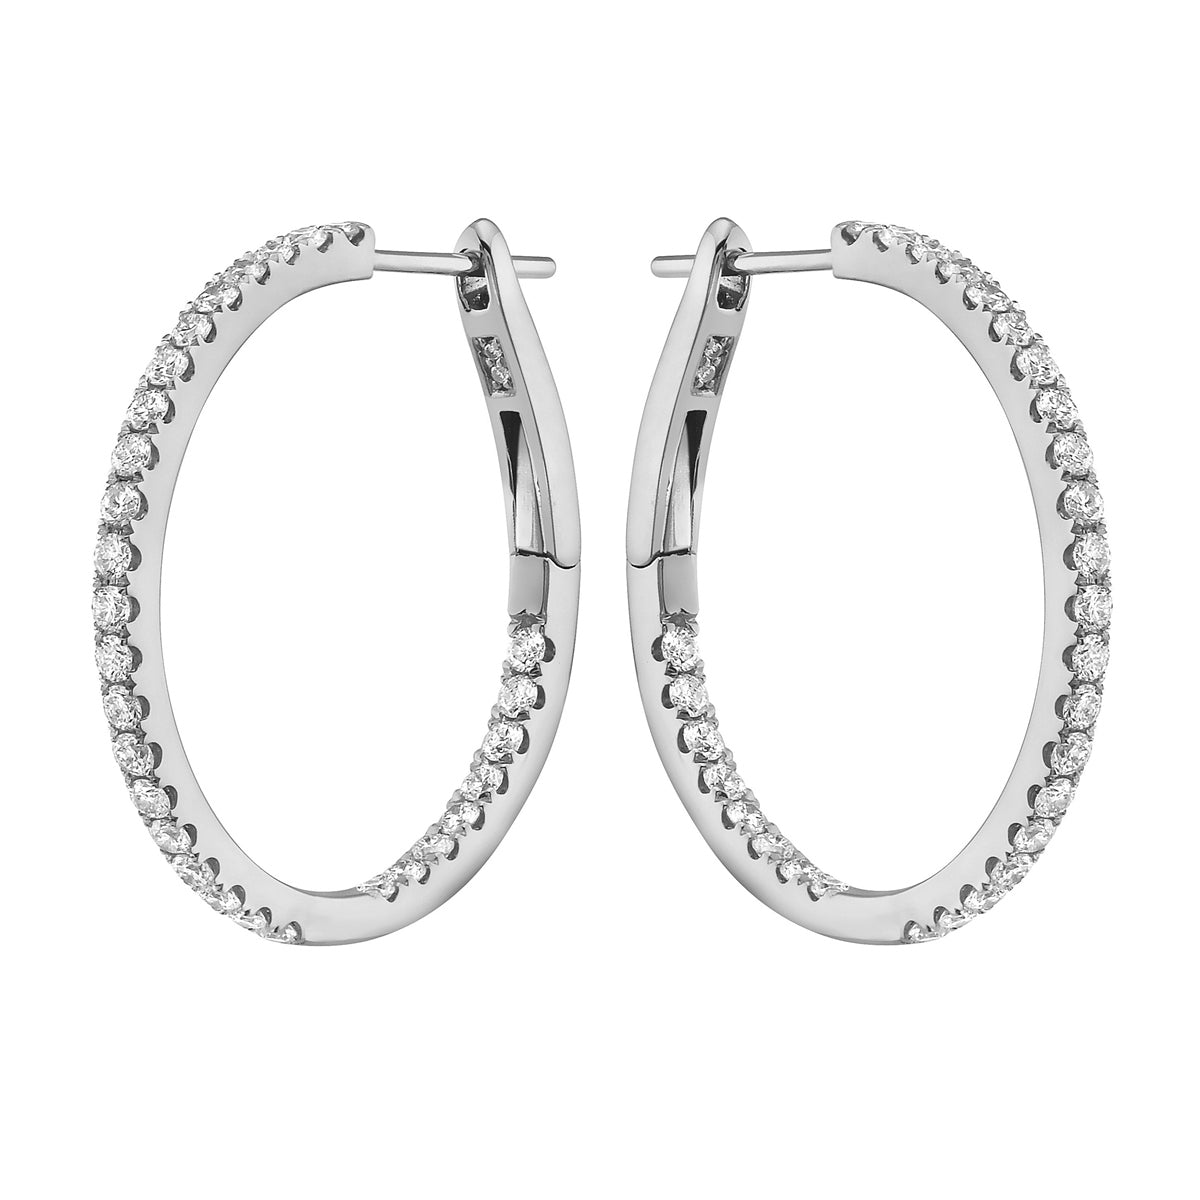 1.0 in White Gold Inside and Out Diamond Hoop Earrings